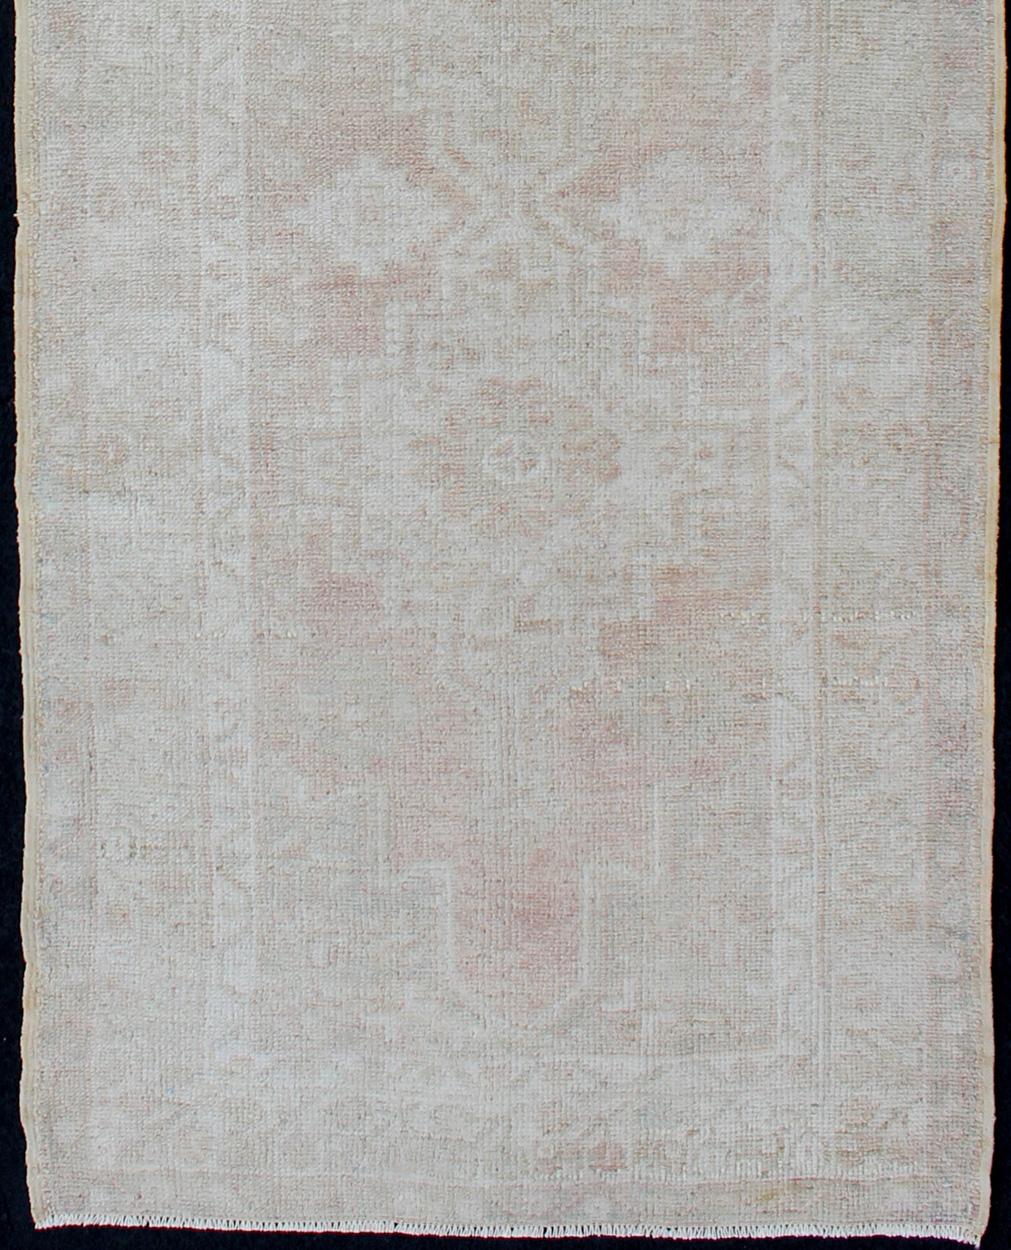 Vintage Oushak Runner from Turkey with Medallion Design in subdued color tones, rug en-176222, country of origin / type: Turkey / Oushak, circa 1940

This beautiful vintage Oushak runner from 1940s Turkey features a Classic Oushak design, which is